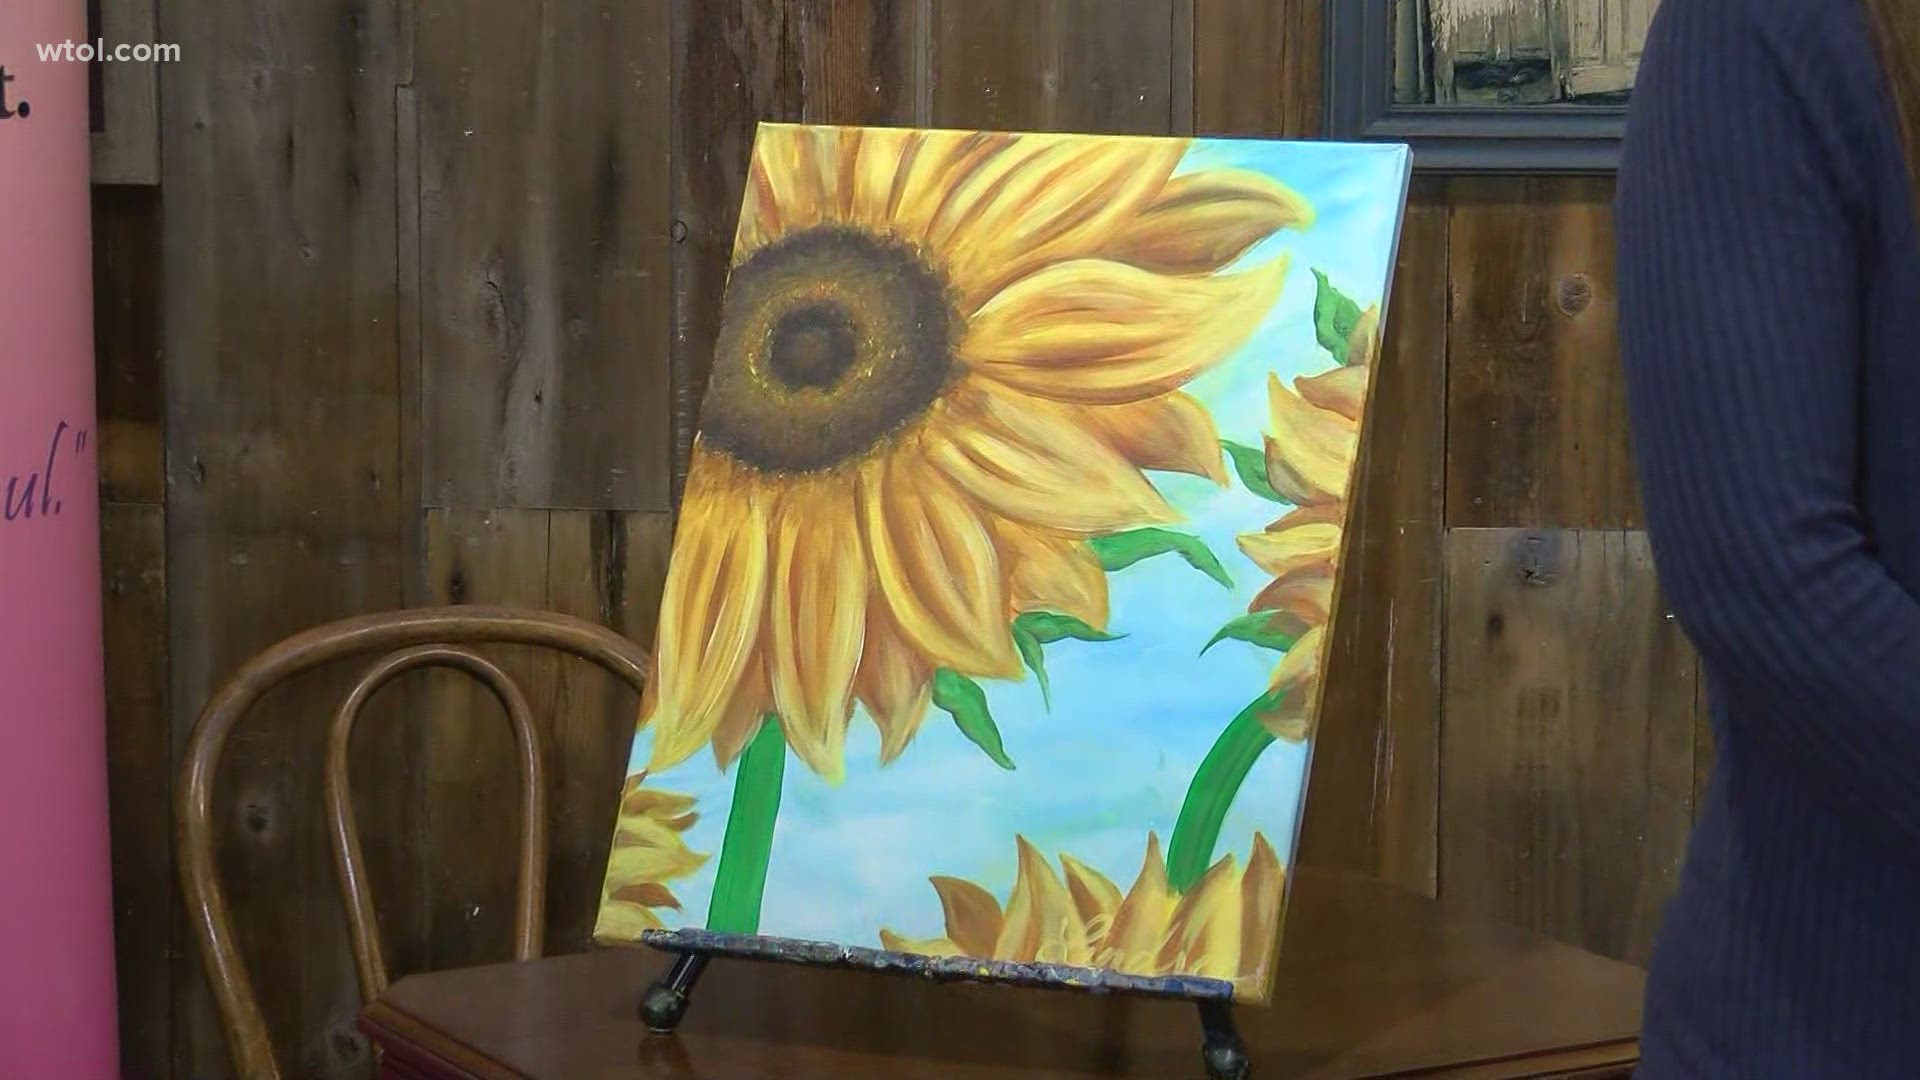 Here's how painting a sunflower can help give those with cancer a much-needed day of pampering!